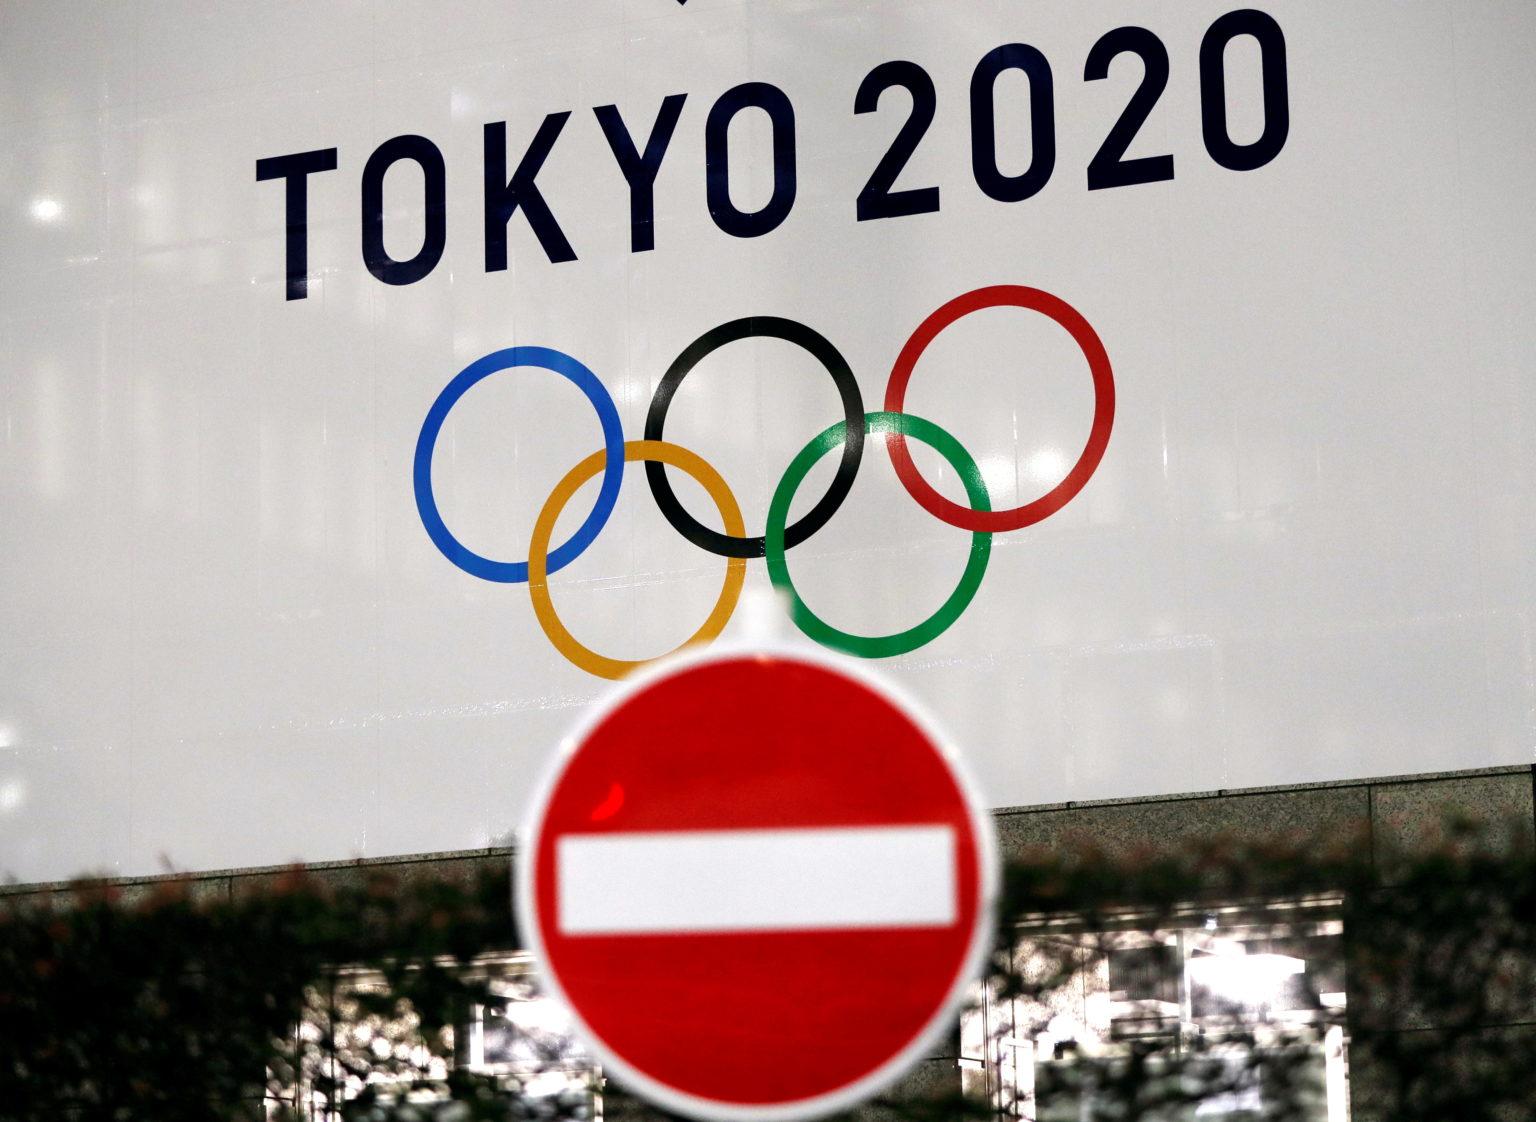 Japan privately concludes Tokyo Olympics should be canceled due to